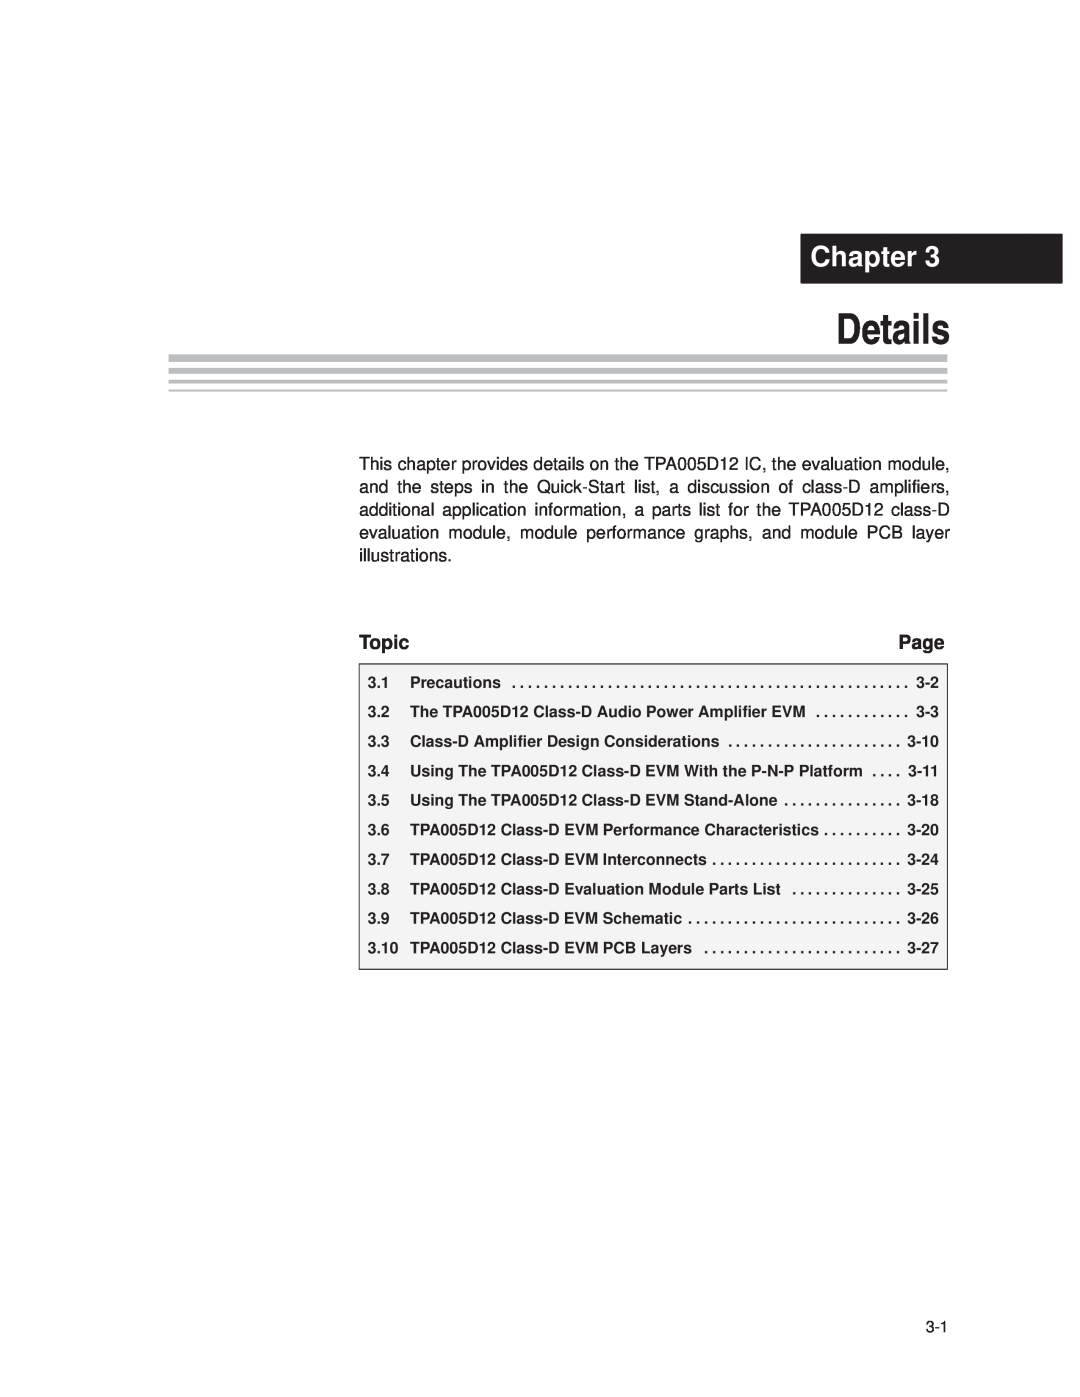 Texas Instruments TPA005D12 manual Details, Chapter, Page, Topic 